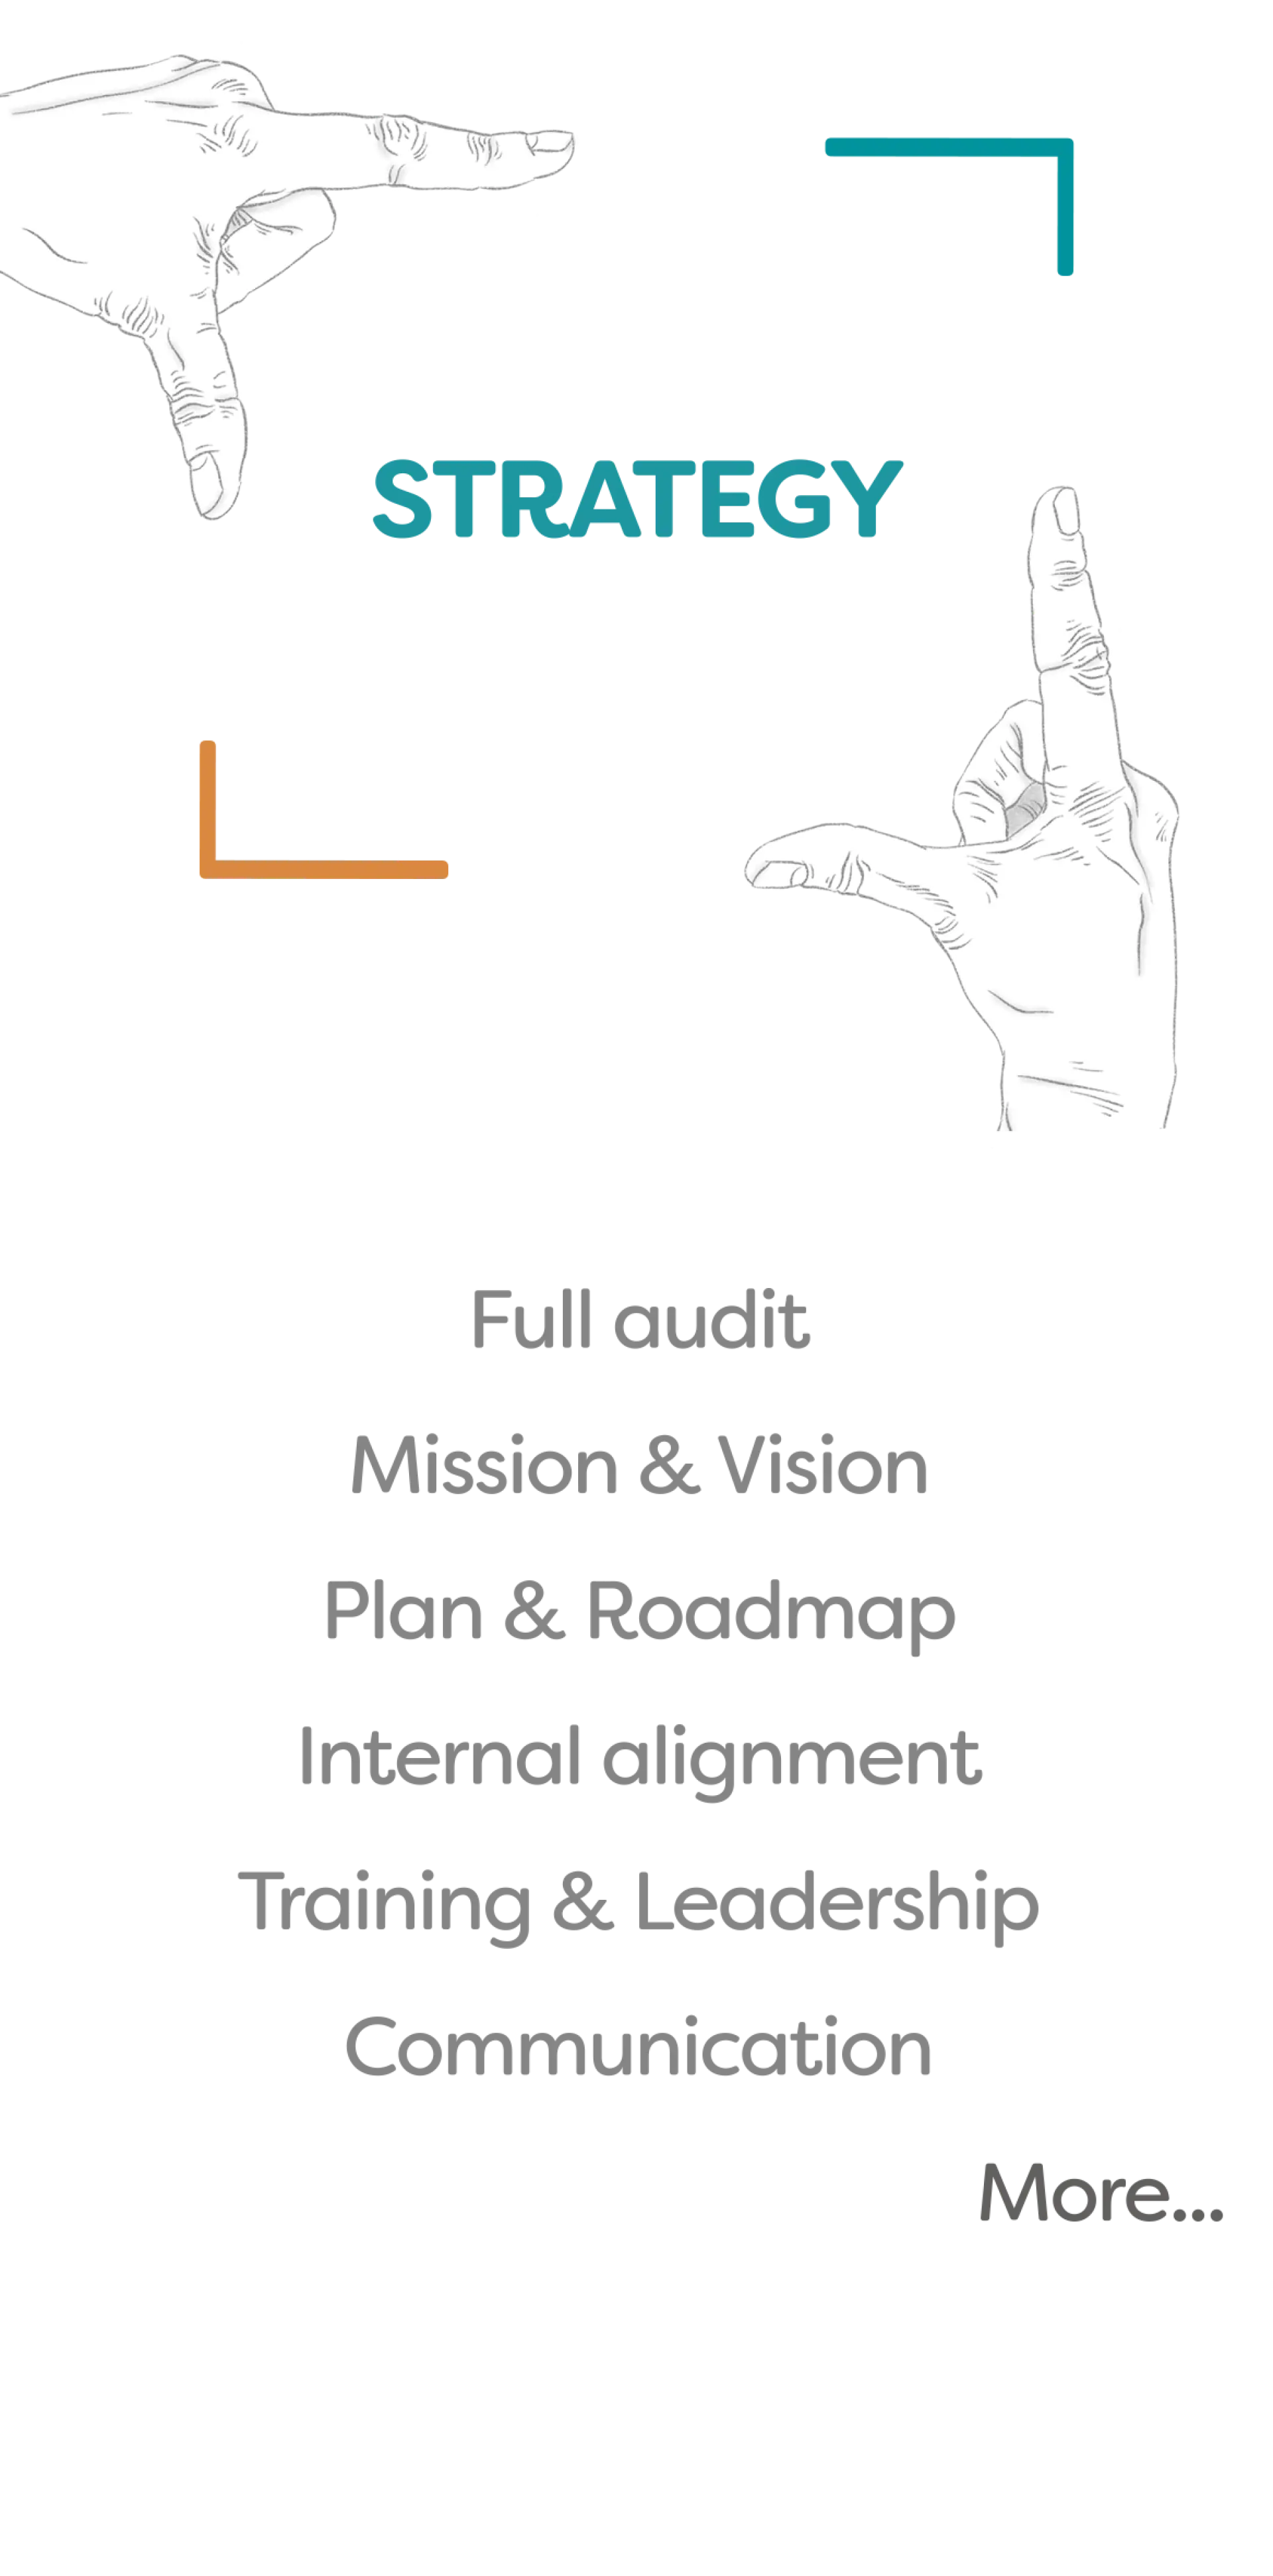 Strategy services : Full audit, Vision, Mission, Leadership. Project-based or As-a-service